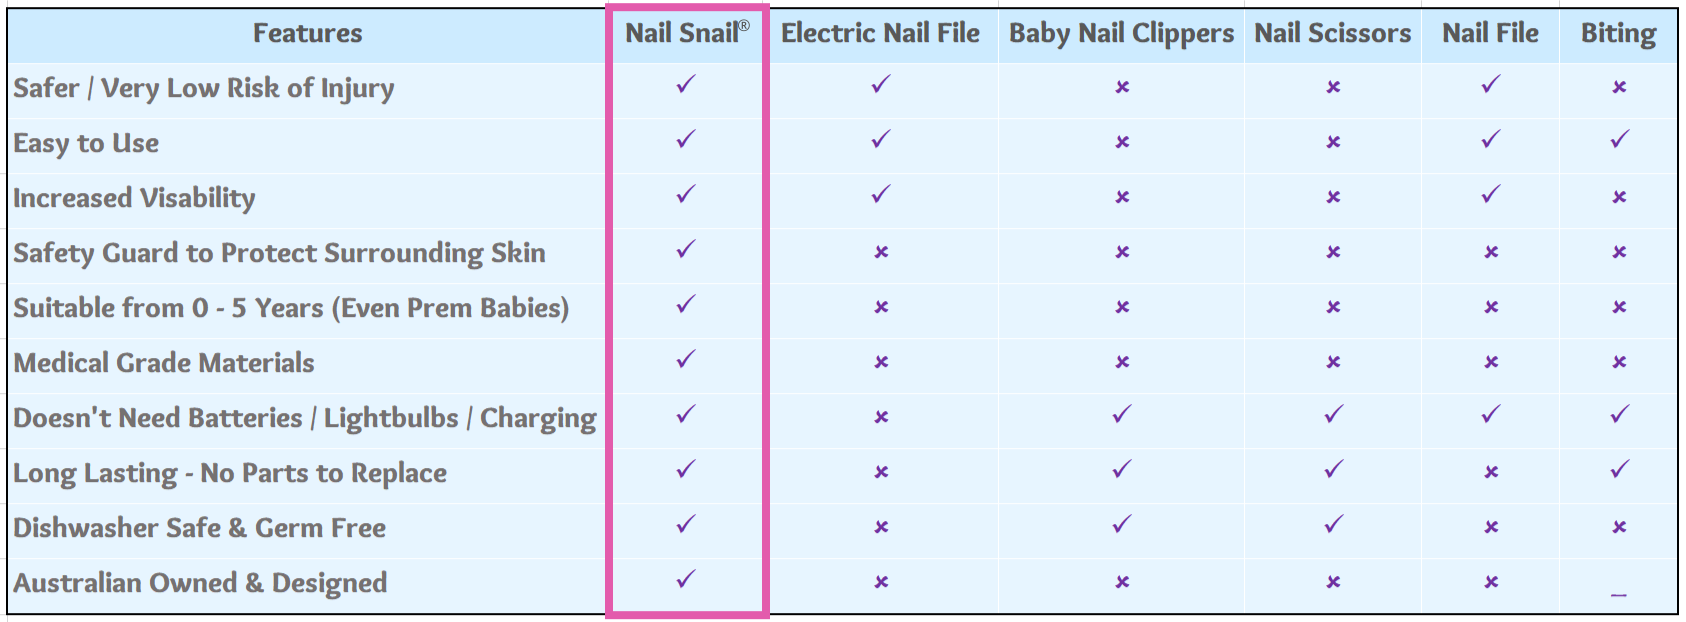 Nail Snail Features